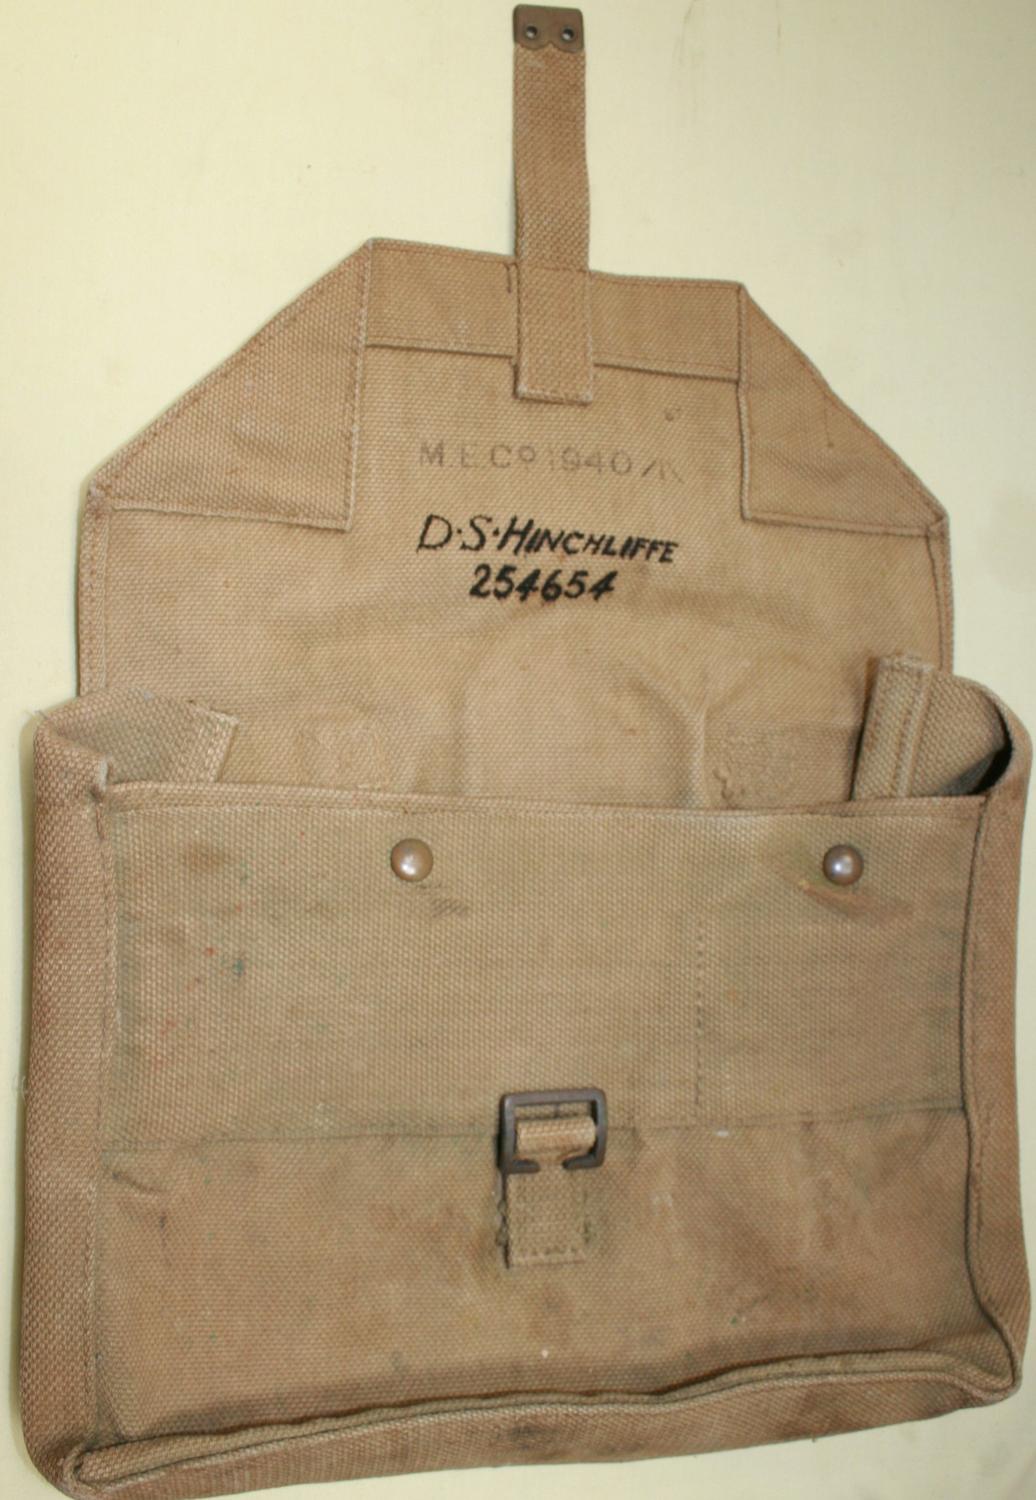 A WWII OFFICERS SIDE PACK 1940 DATED